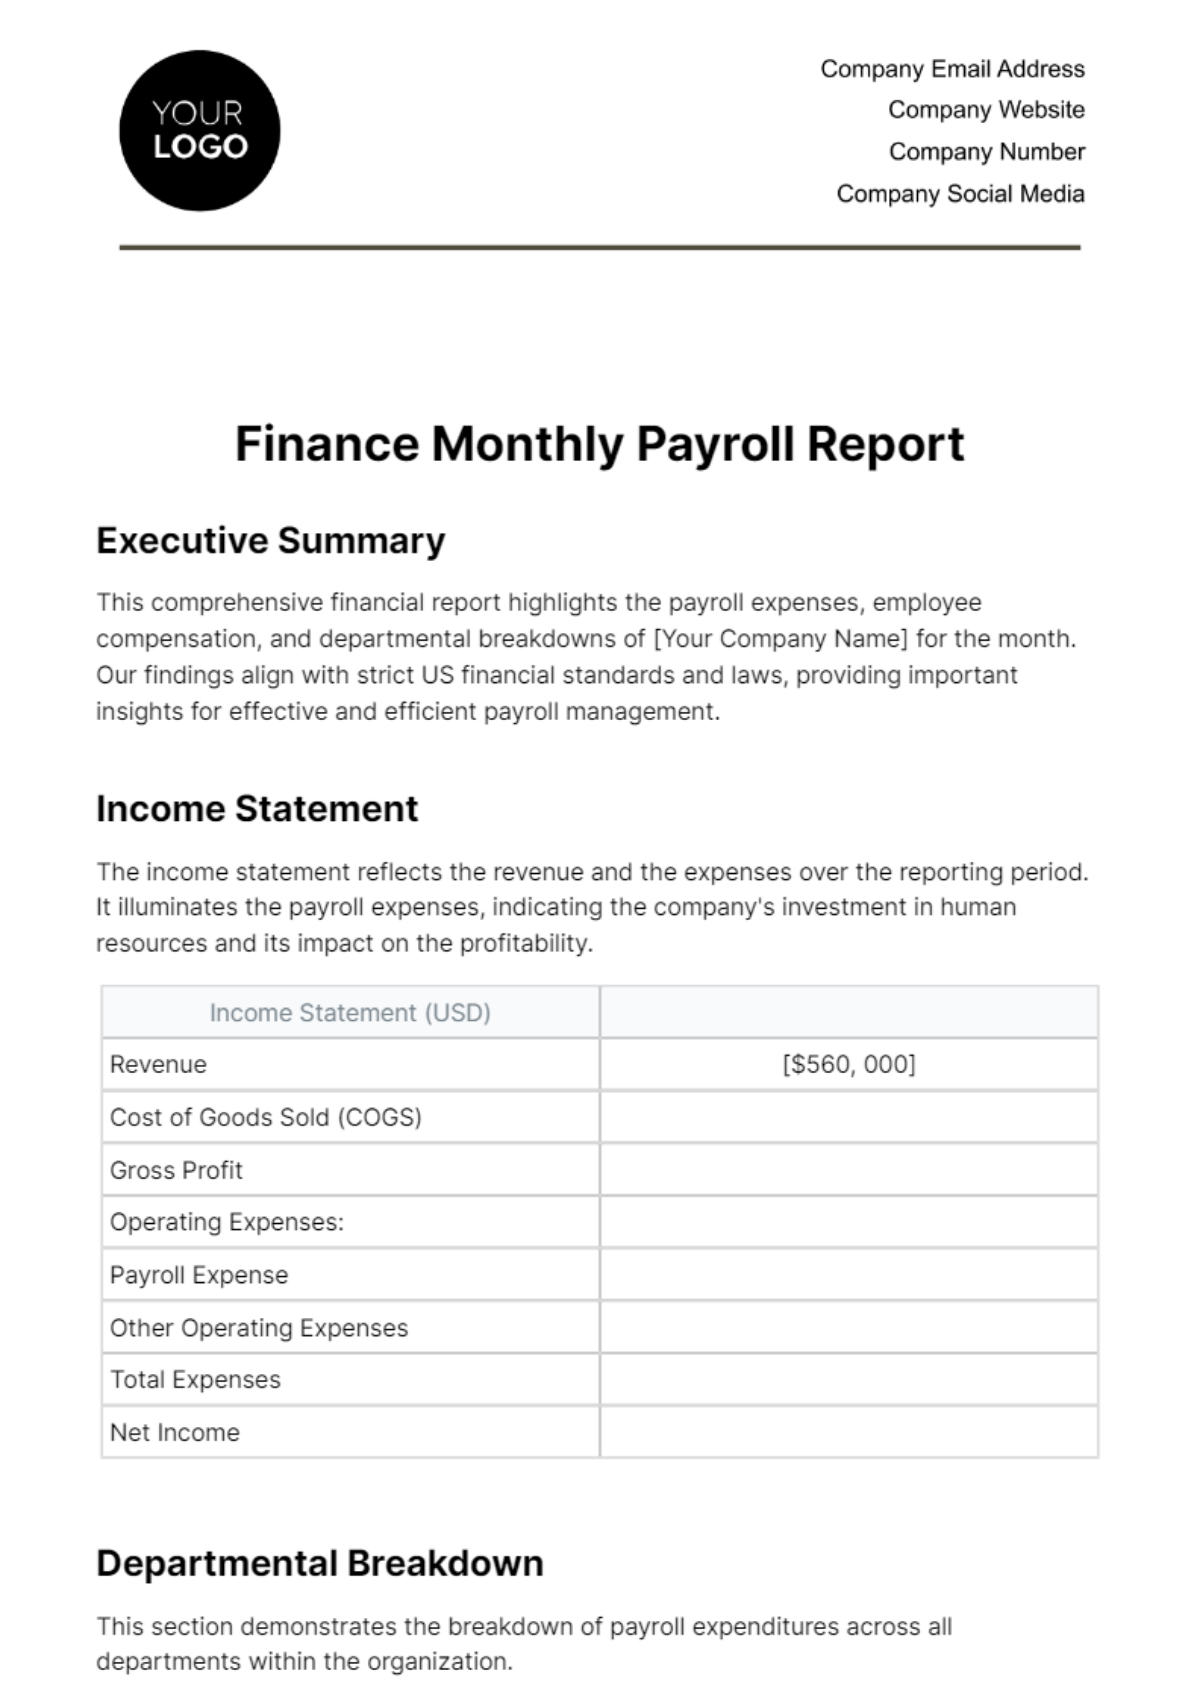 Finance Monthly Payroll Report Template